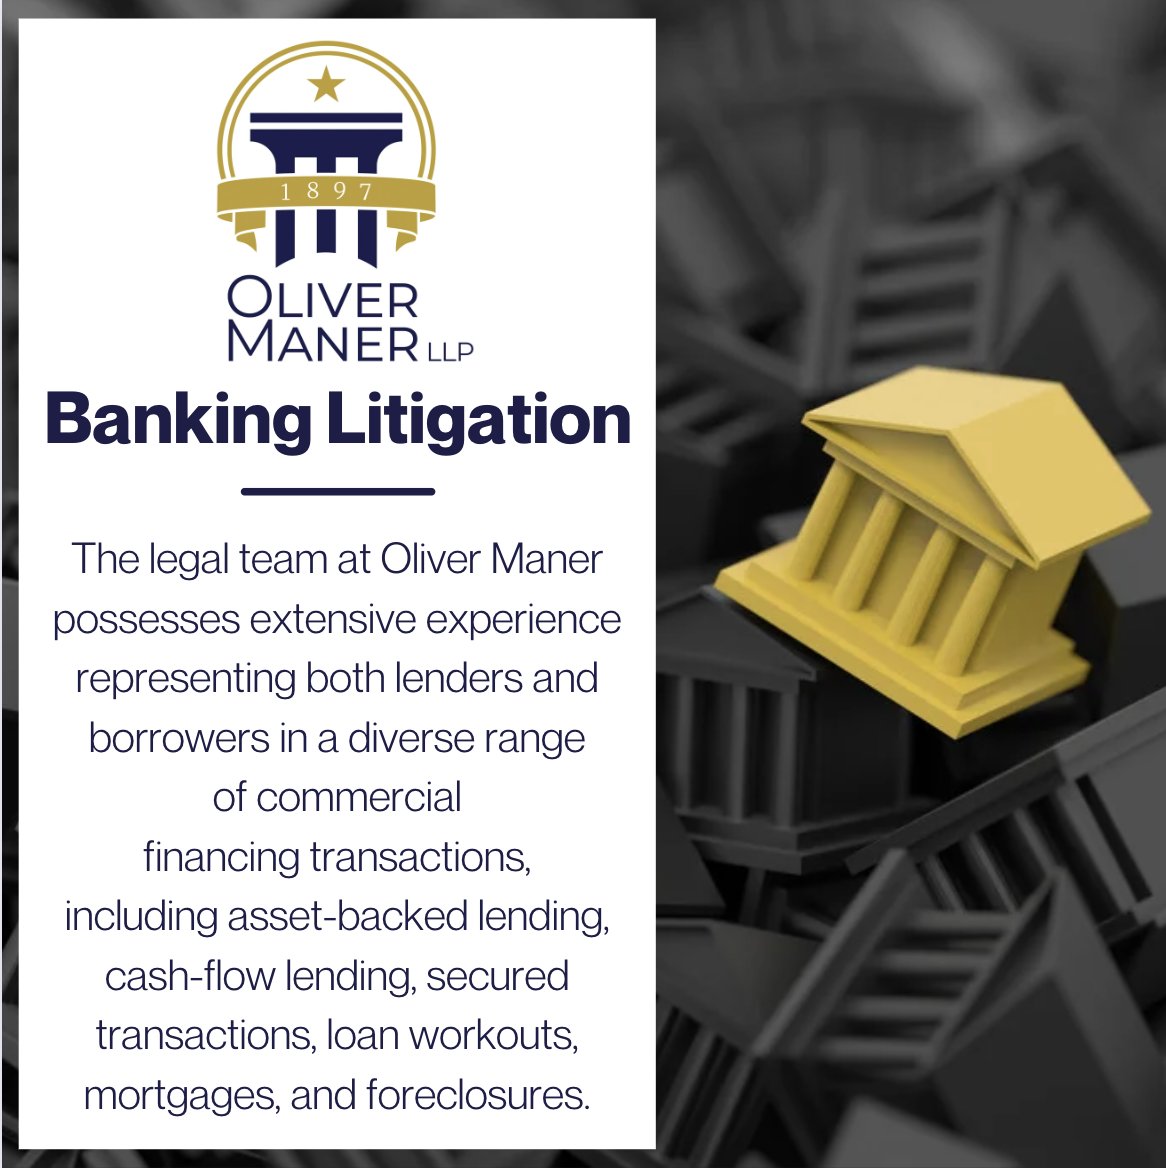 Don't navigate complex legal financial matters alone. At Oliver Maner, our experienced lawyers can help resolve financial disagreements. Contact us today by calling 912-236-3311 or visit our website to learn more. 

#Banking #FinancialDisputes #OliverManer #LegalTeam #Savannah